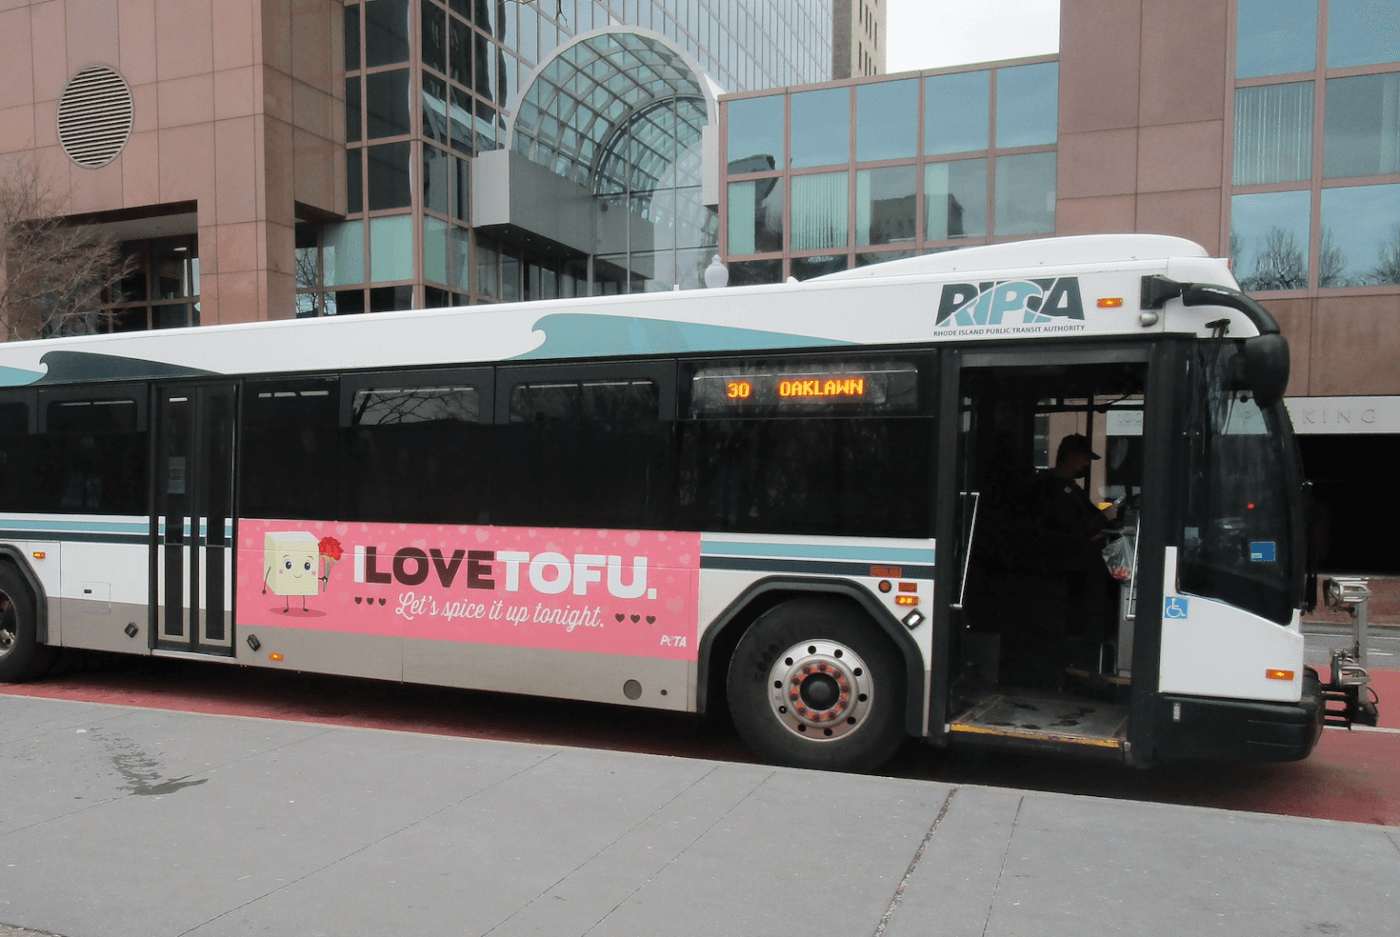 'I Love Tofu' Ad on a Bus in Providence Rhode Island for Valentines Day